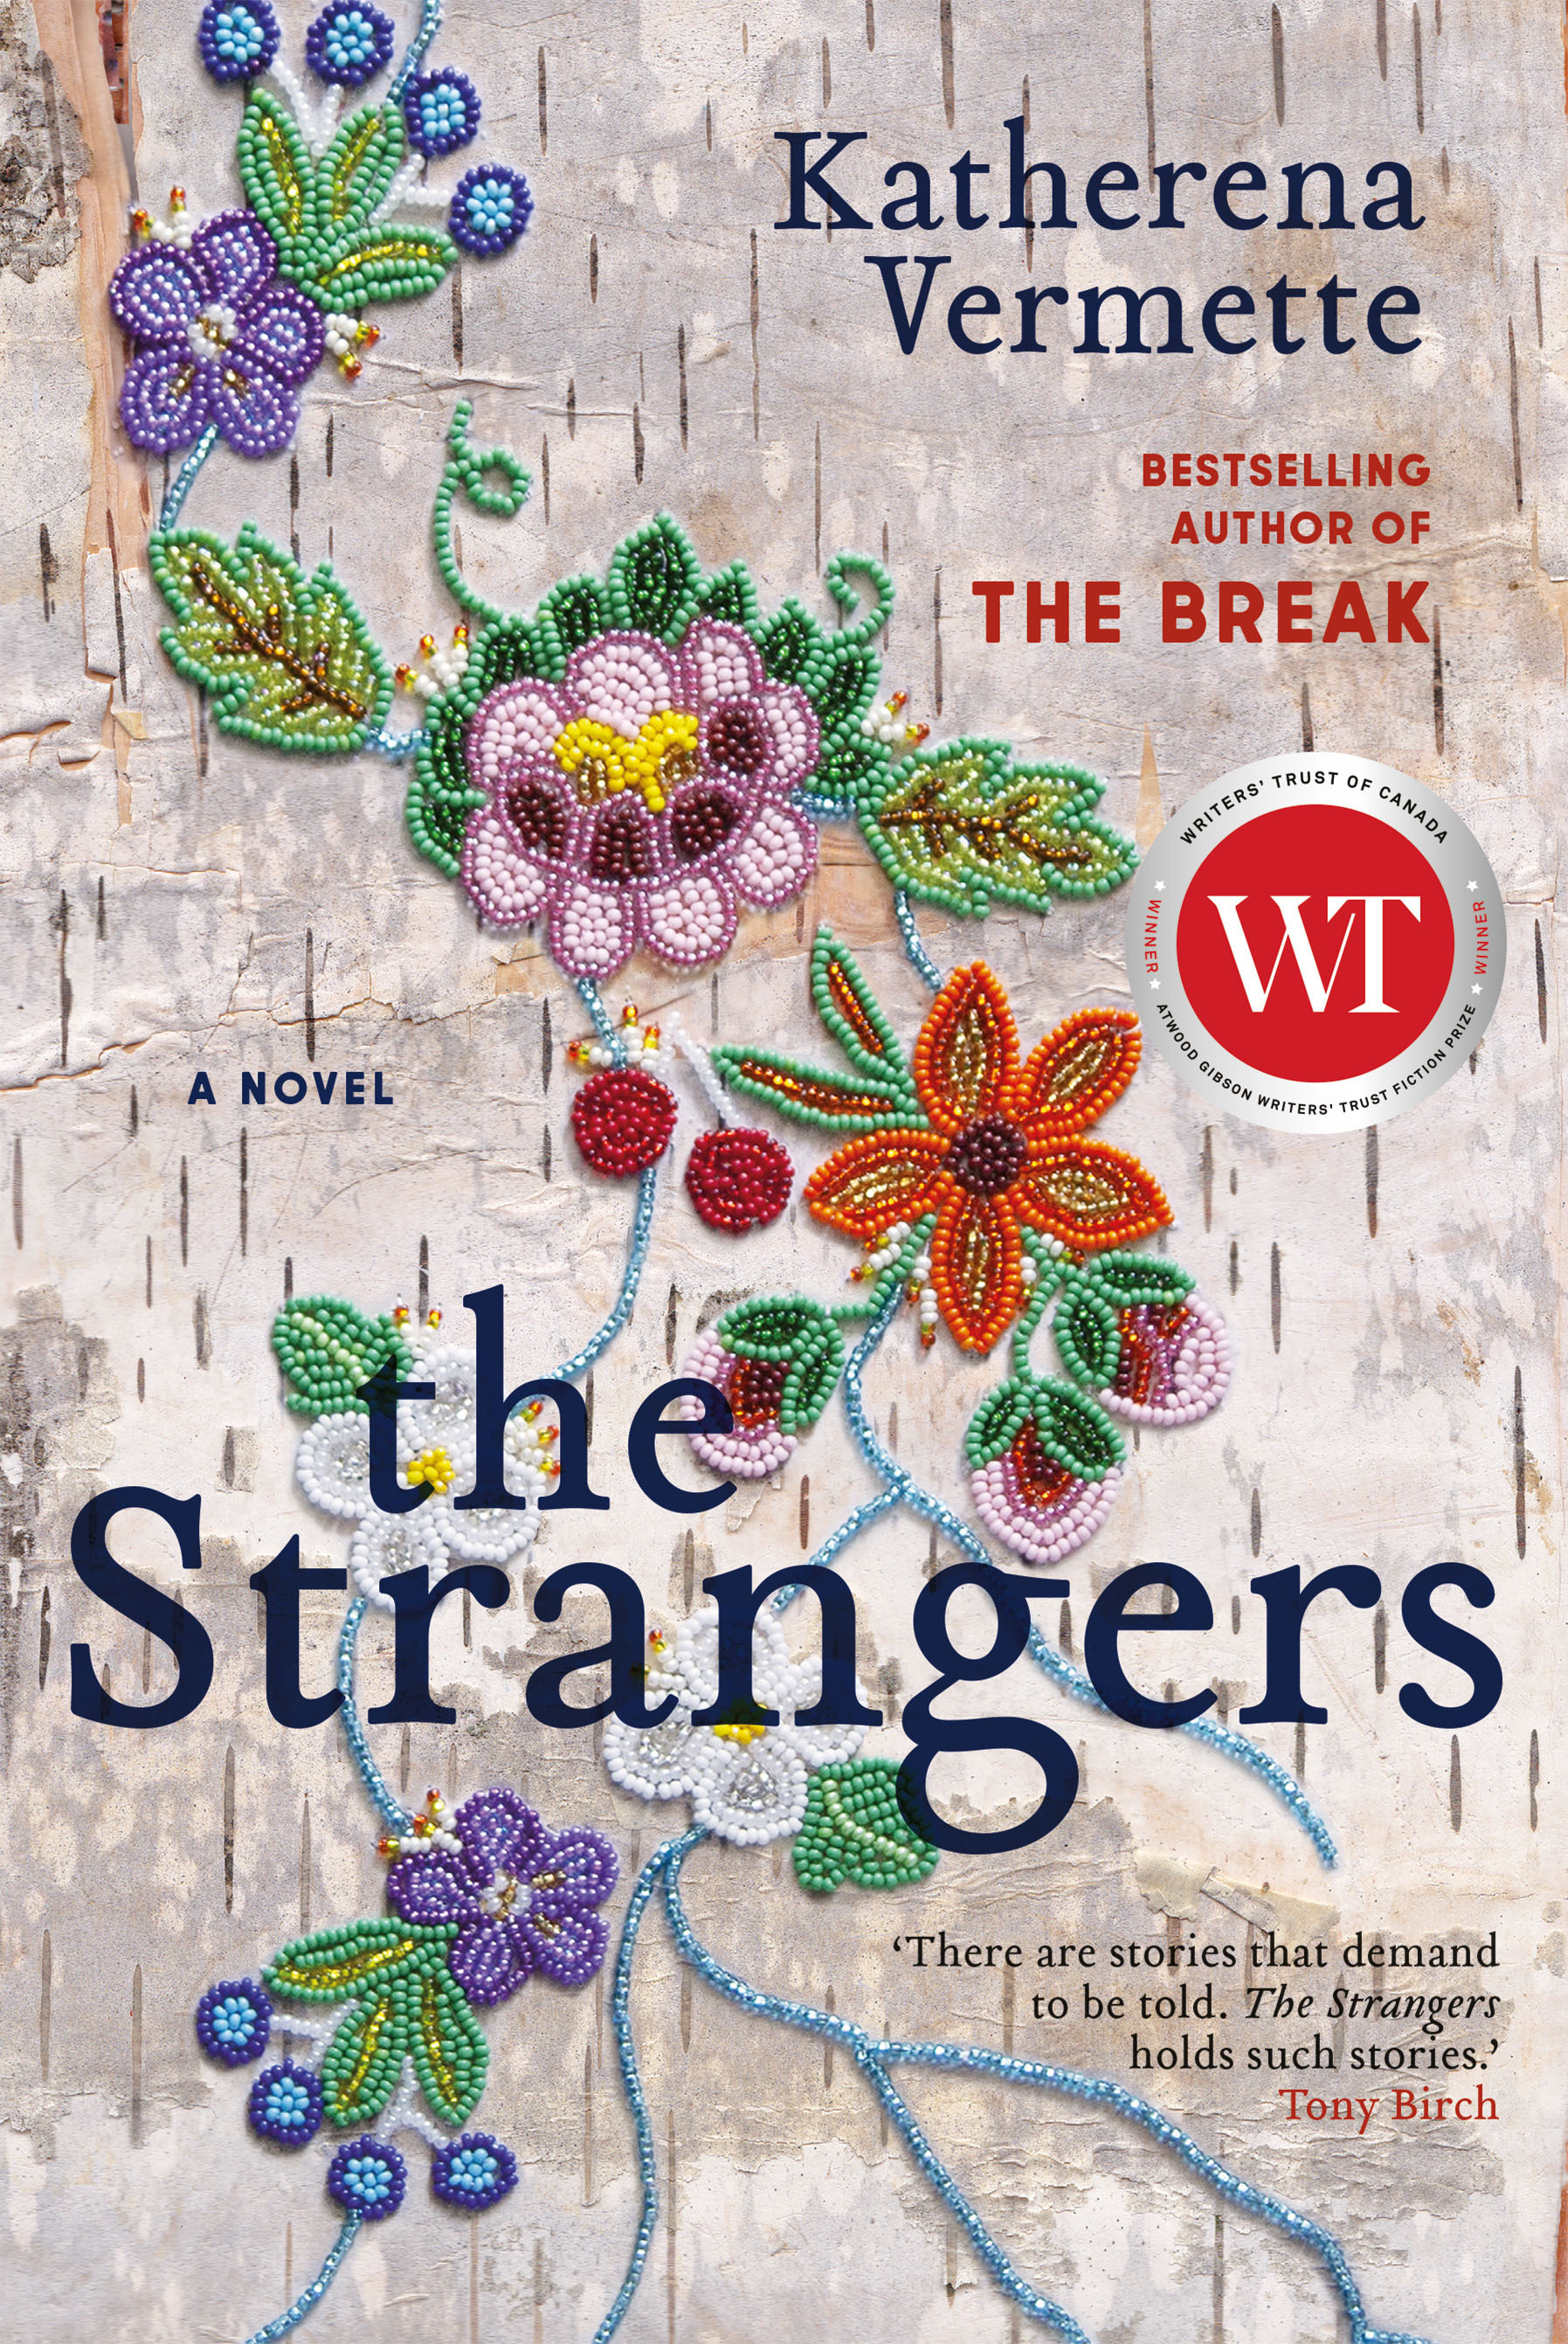 Cover of The Strangers by Katherena Vermette featuring embroidered flowers of small colourful beads